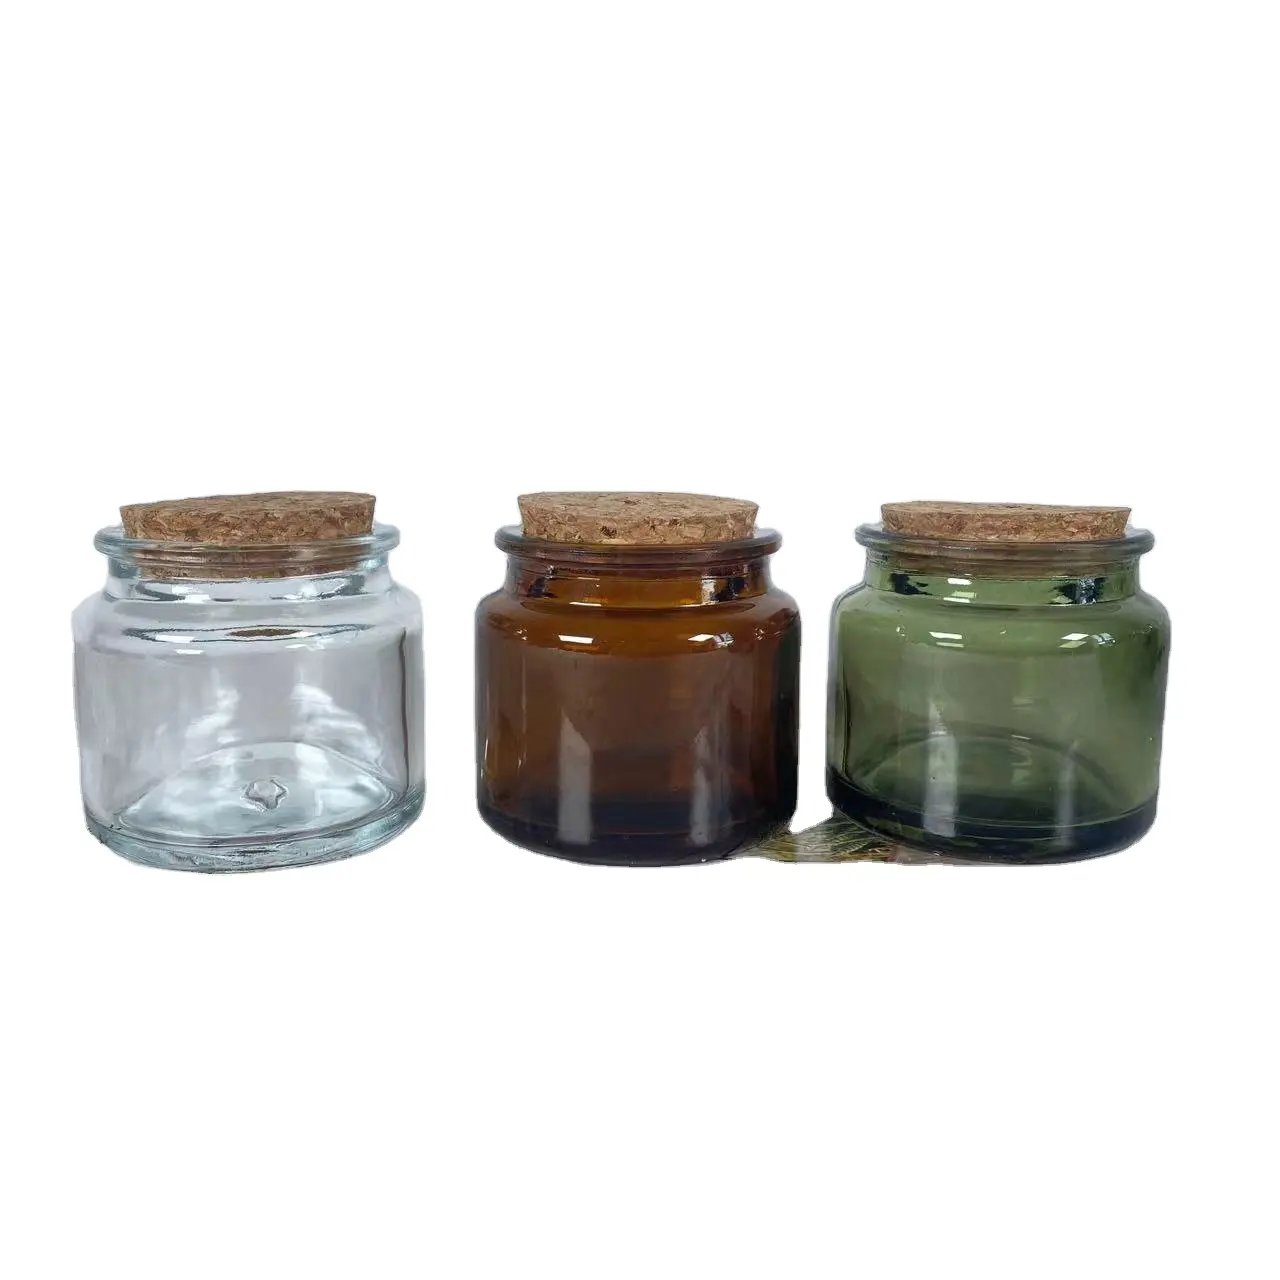 Private Label 100ml round Clear Amber Green Glass Candle Vessel Container Empty Jar with Black Screw Cap for Skin Care Candles